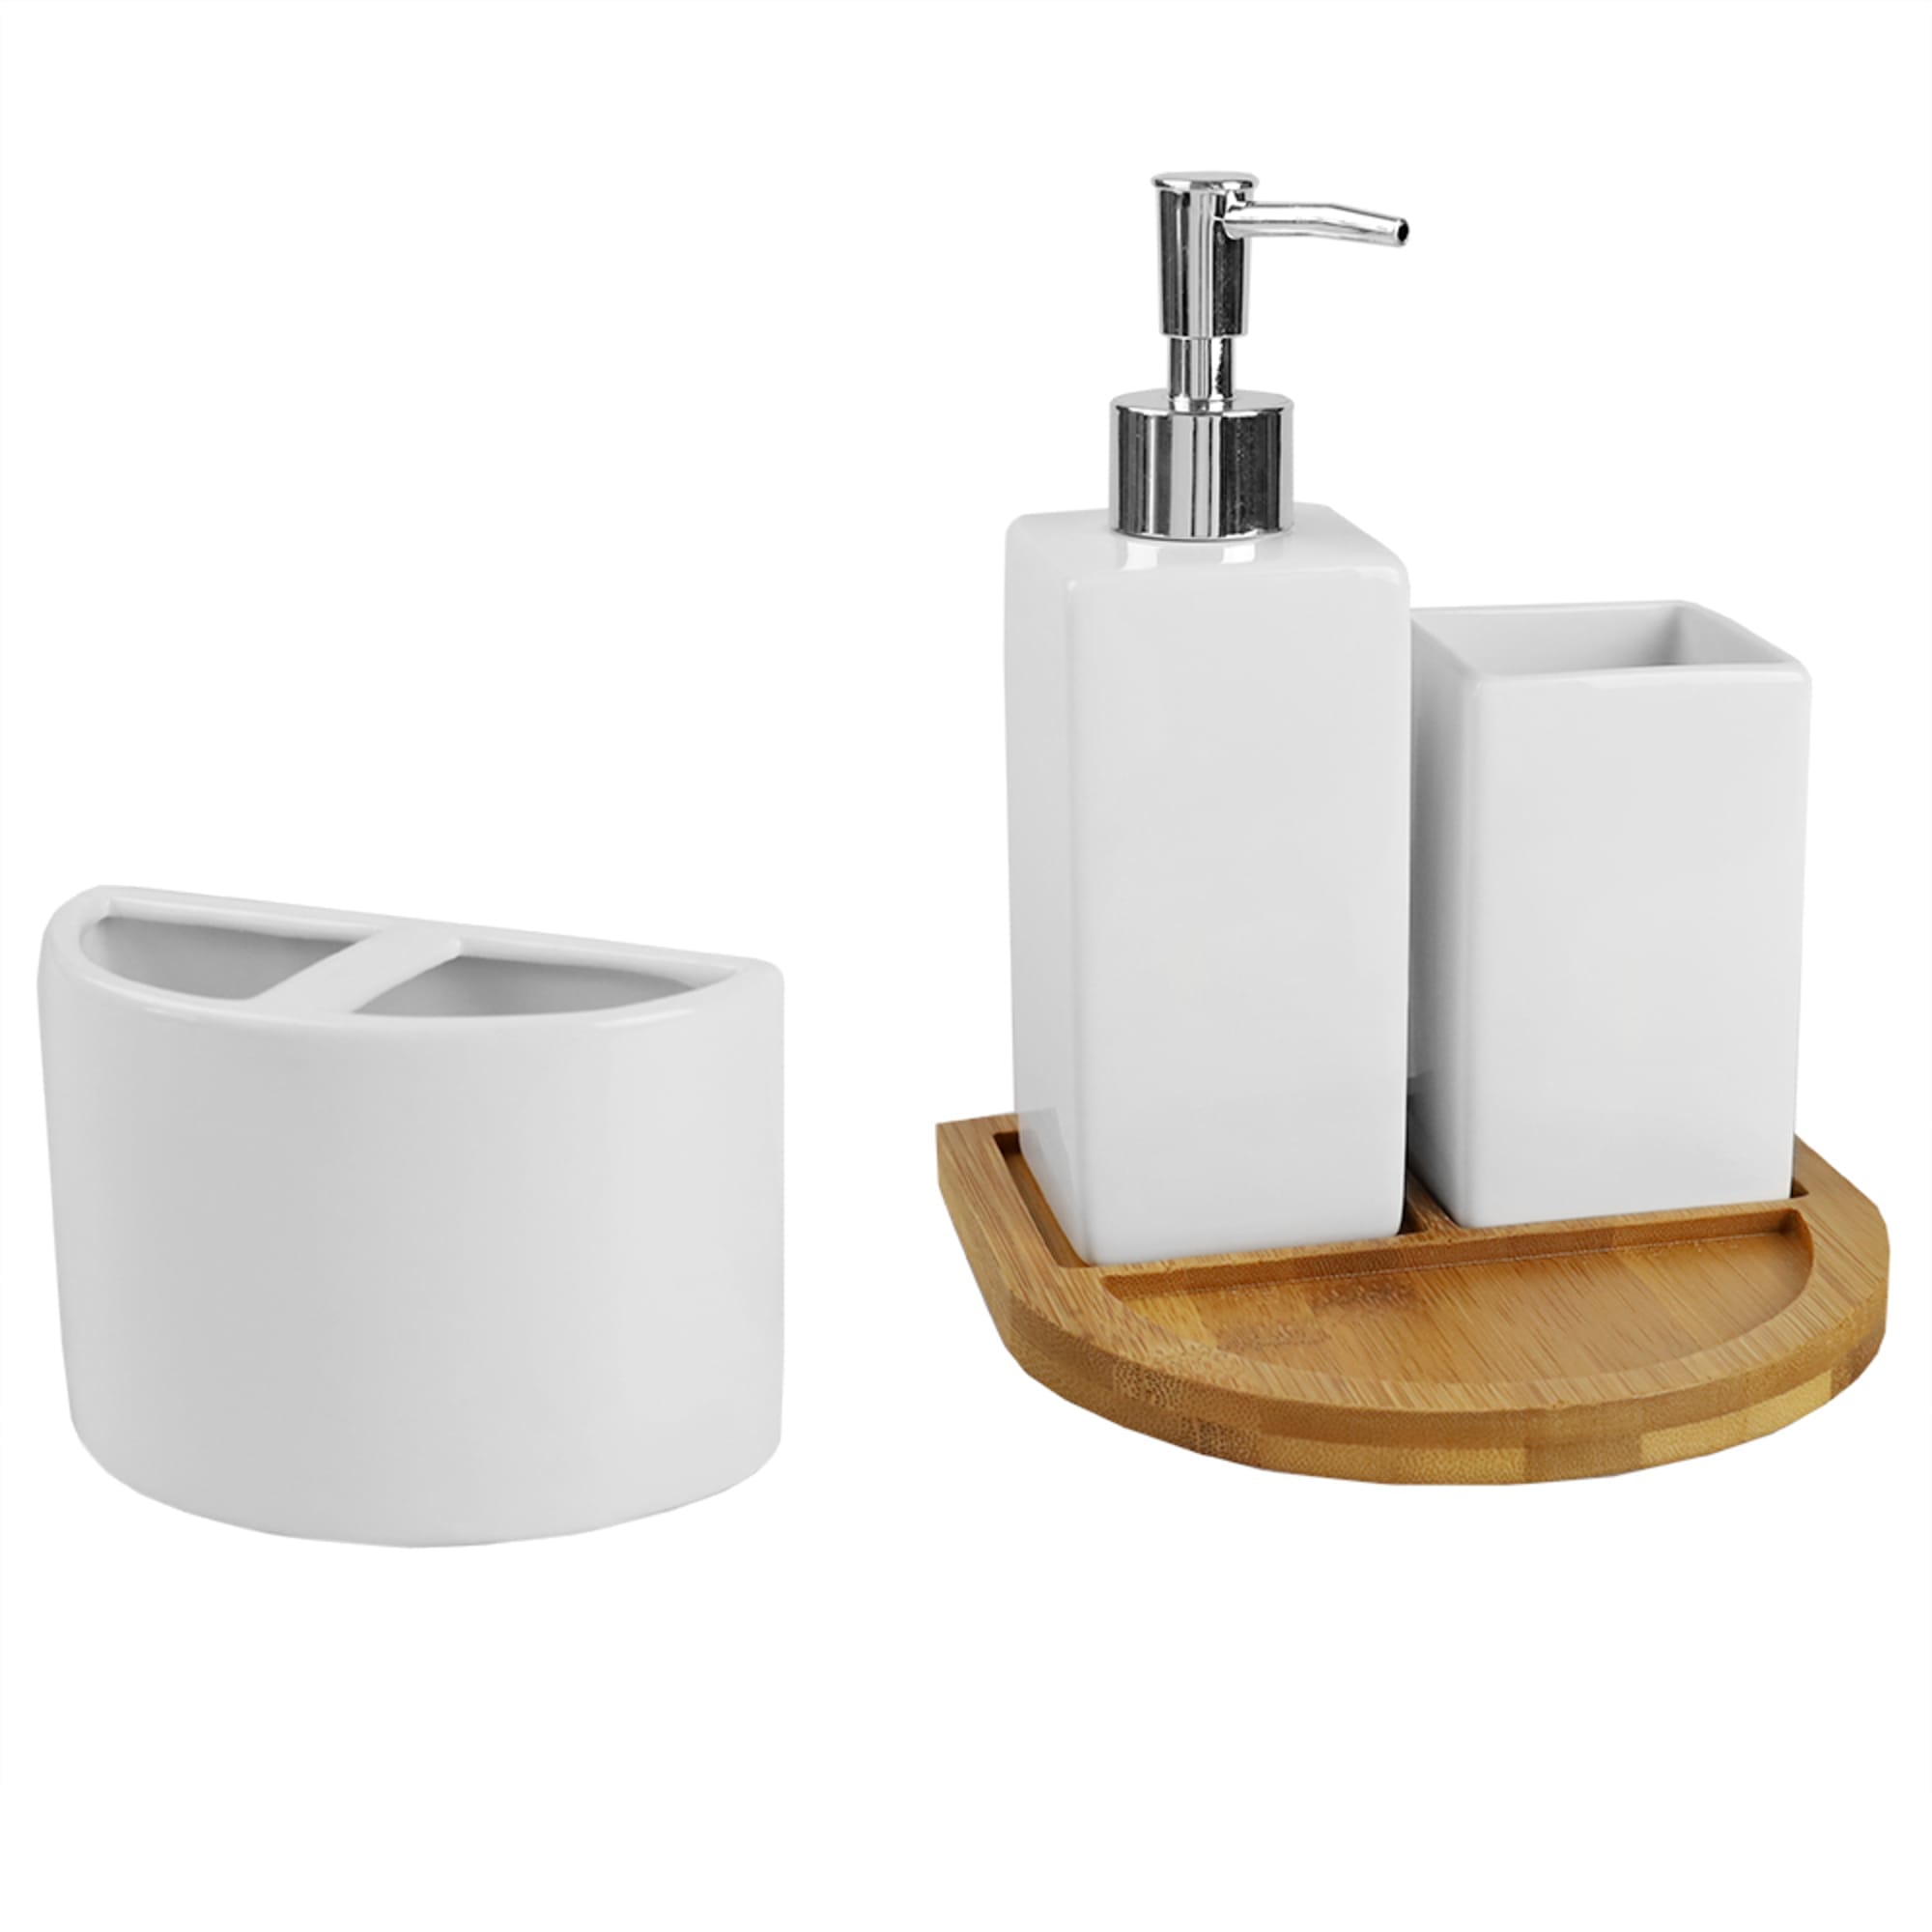 Home Basics Serene Scandinavian 4 Piece Ceramic Bath Accessory Set with Bamboo Tray, White $12.00 EACH, CASE PACK OF 12